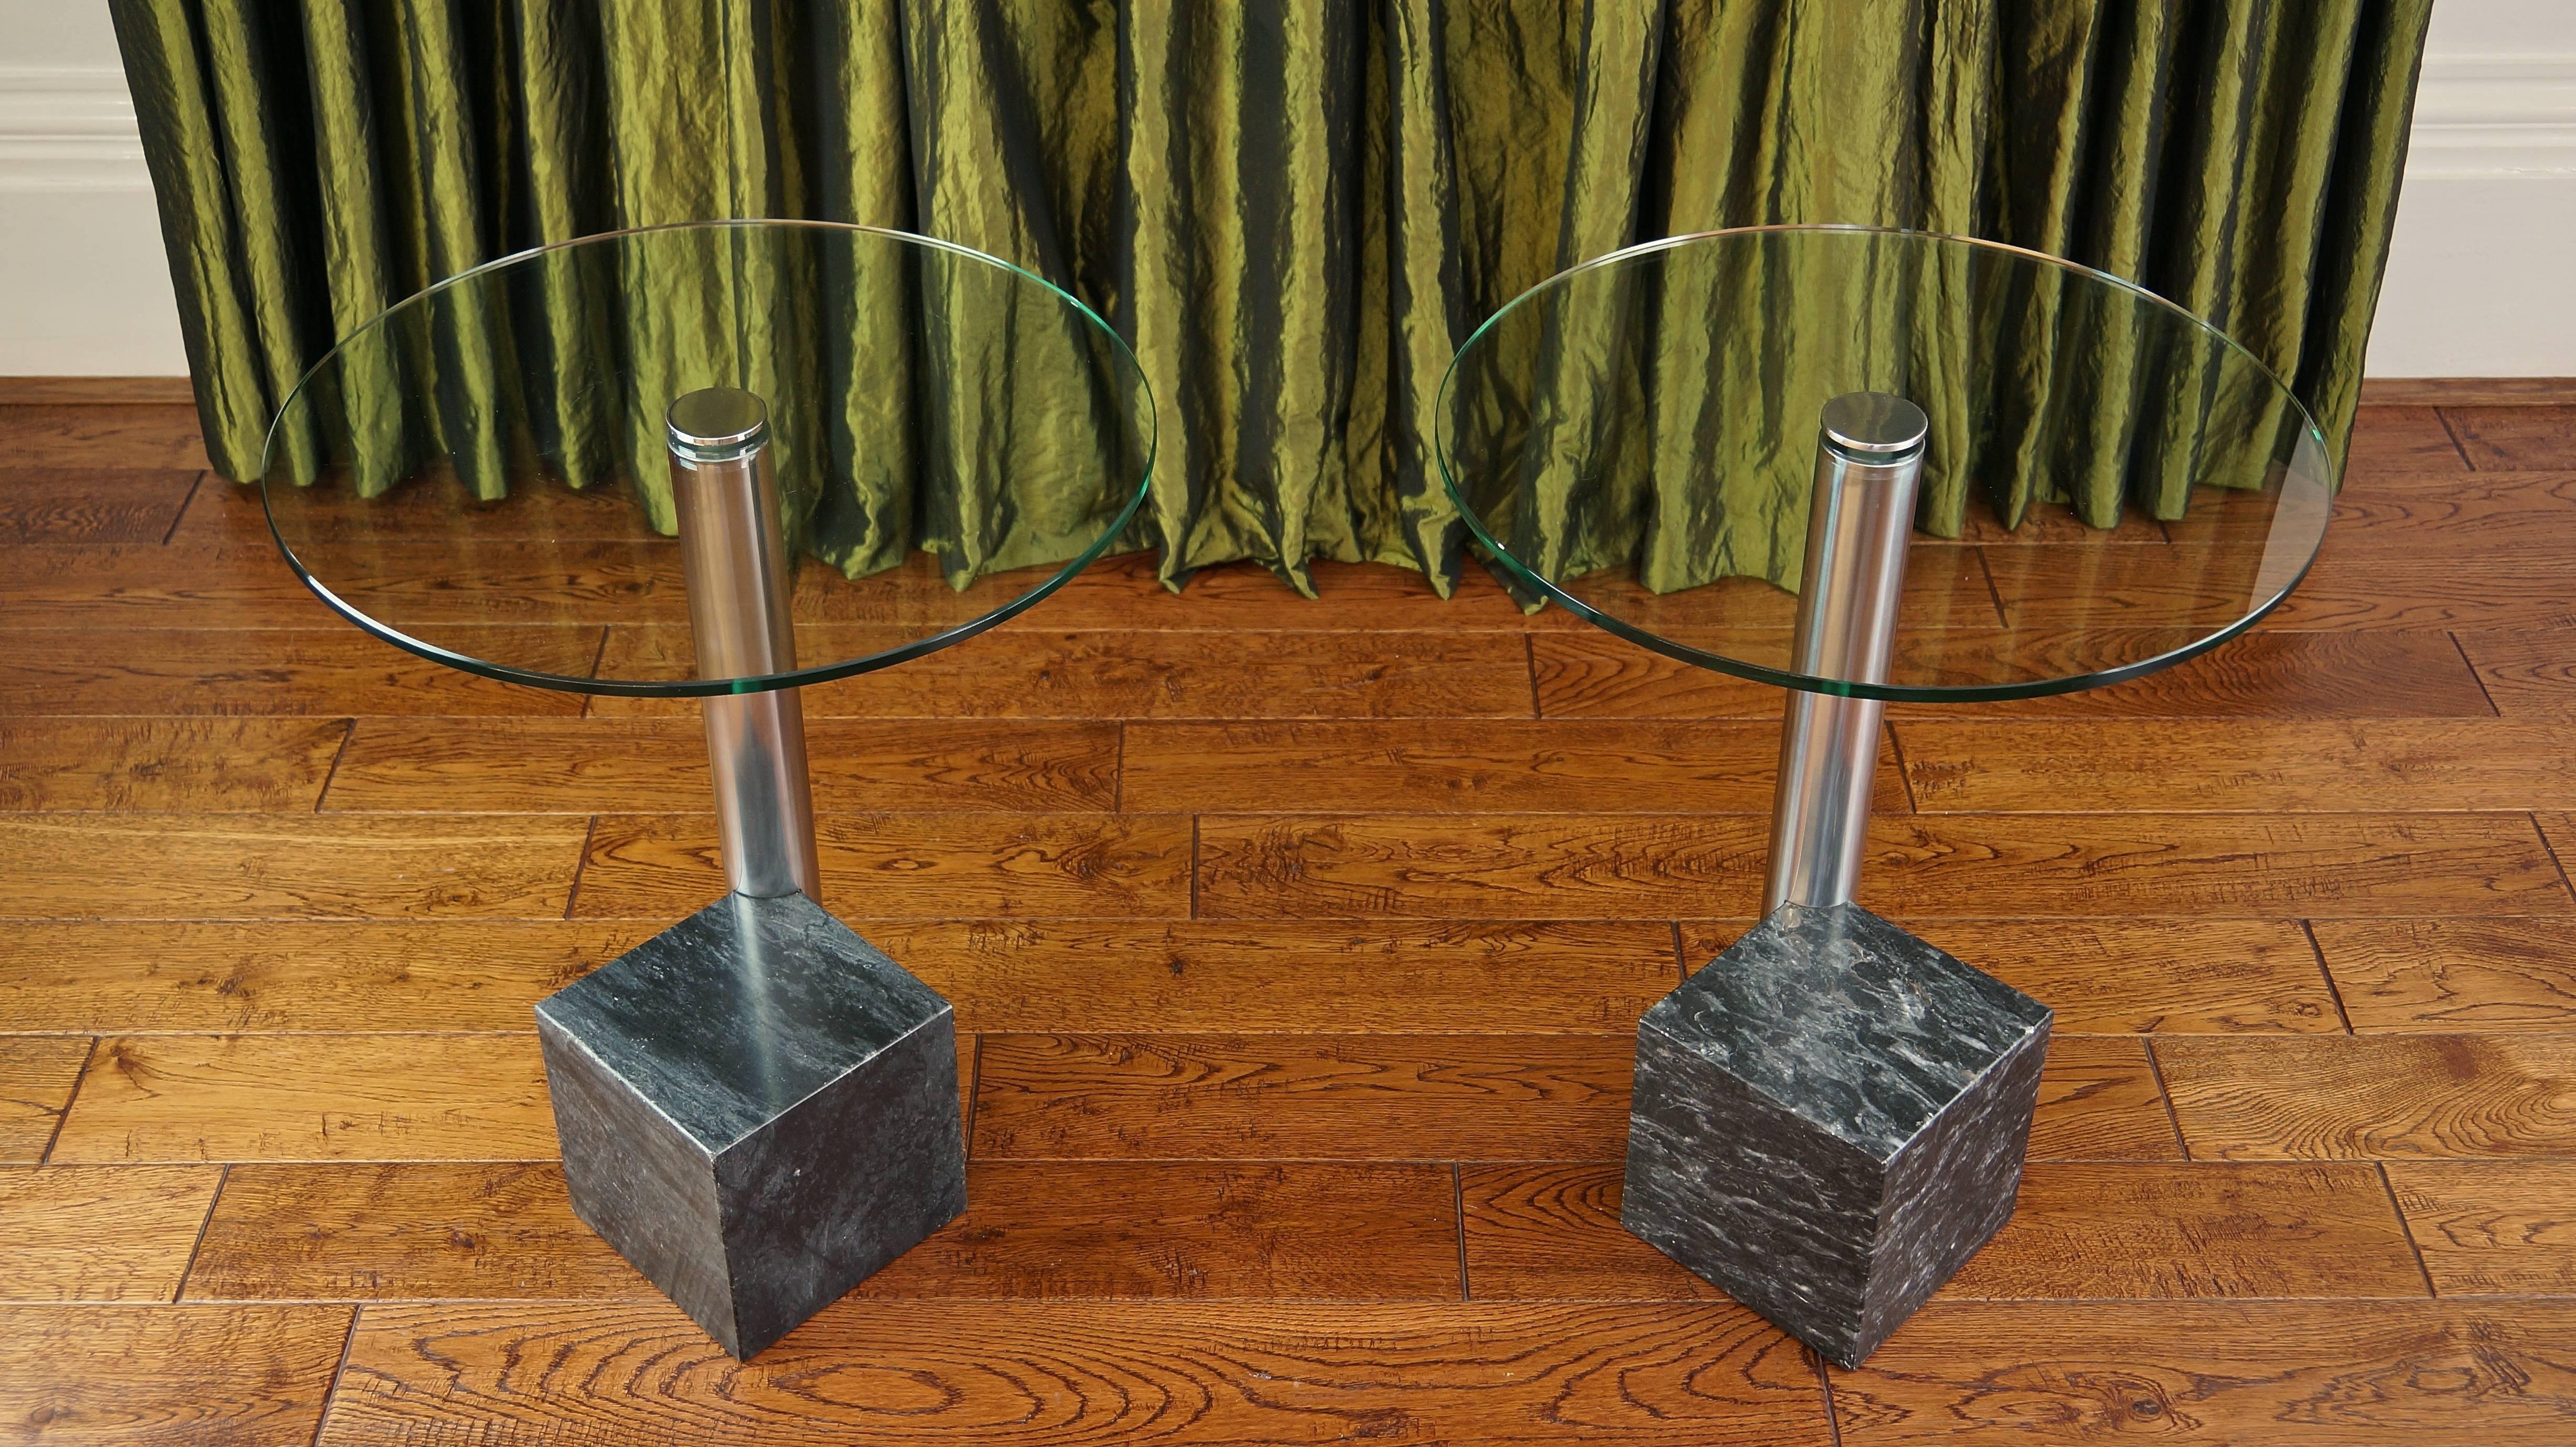 Pair of Vintage Marble and Glass HK2 Side Tables by Hank Kwint, Metaform 1980s For Sale 1